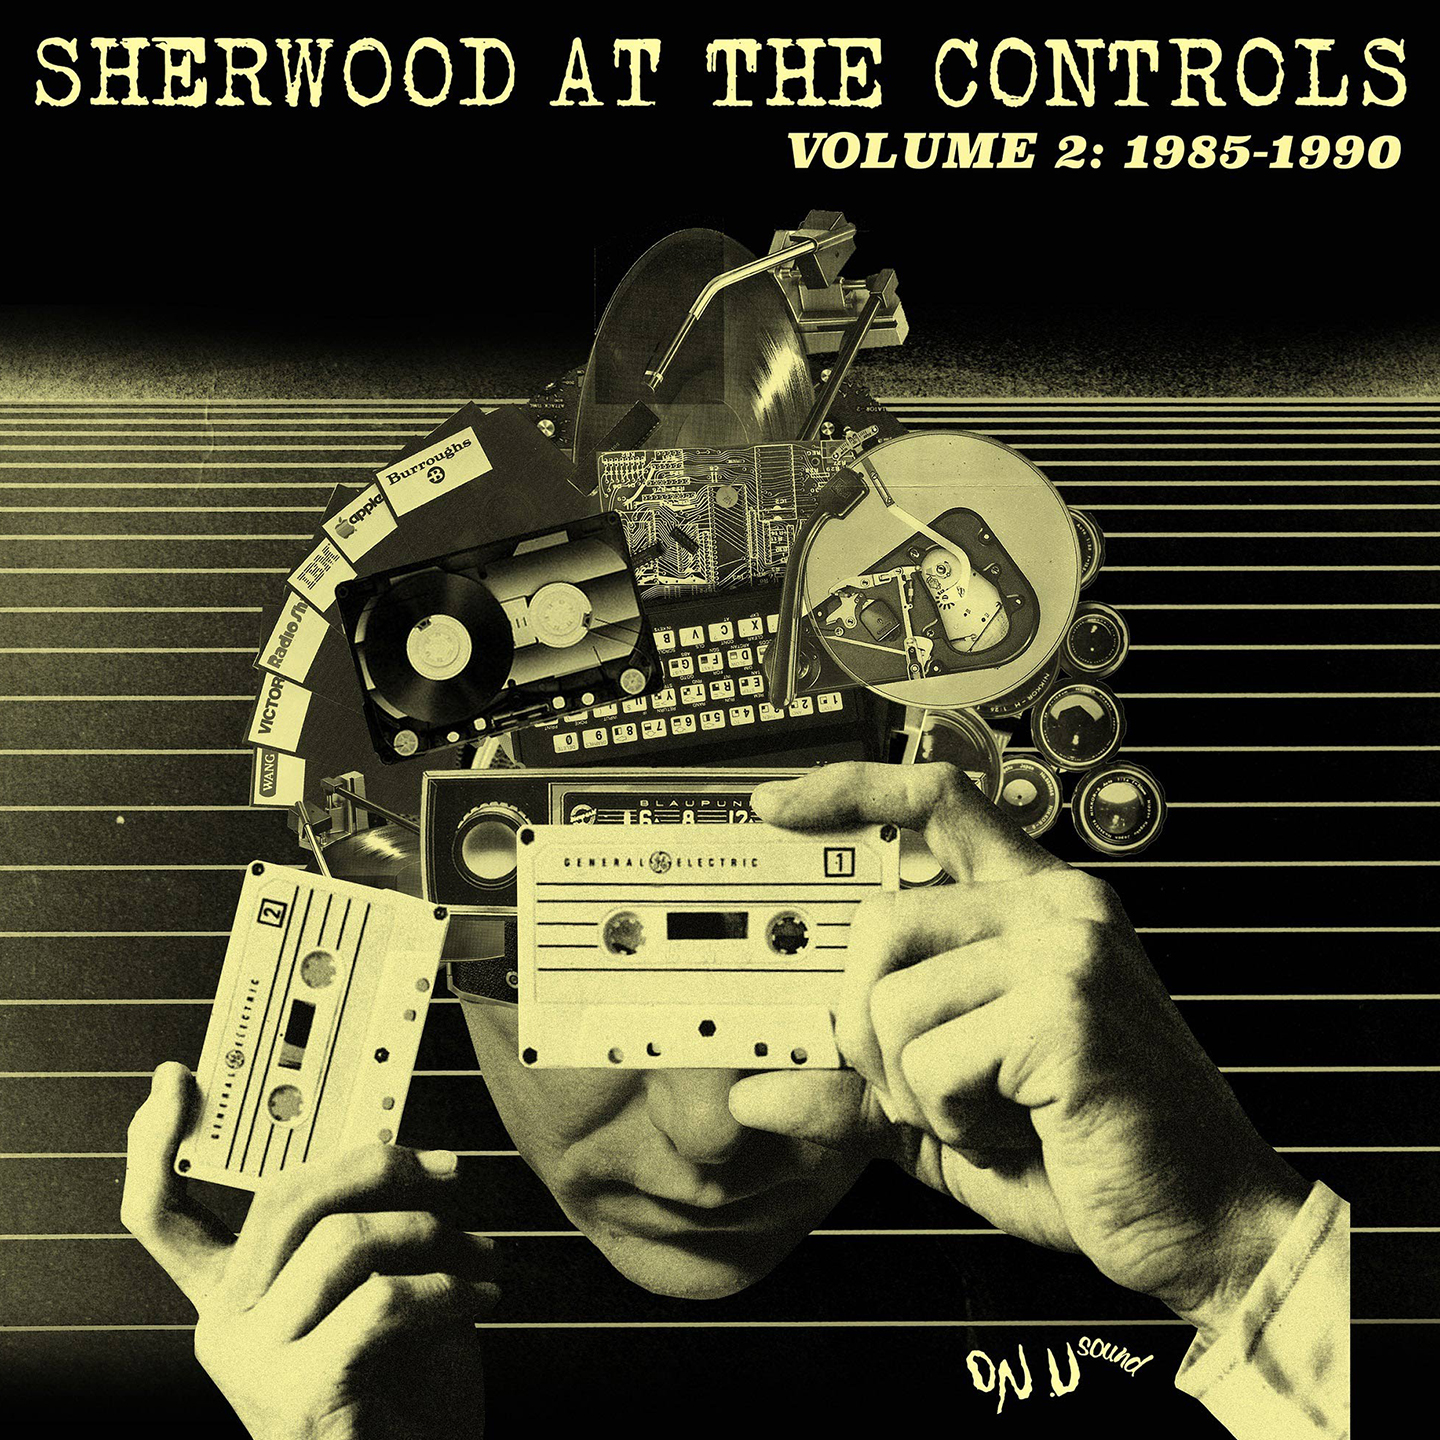 Album of the Week: Various Artists – Sherwood at the Controls Volume 2 1985-1990